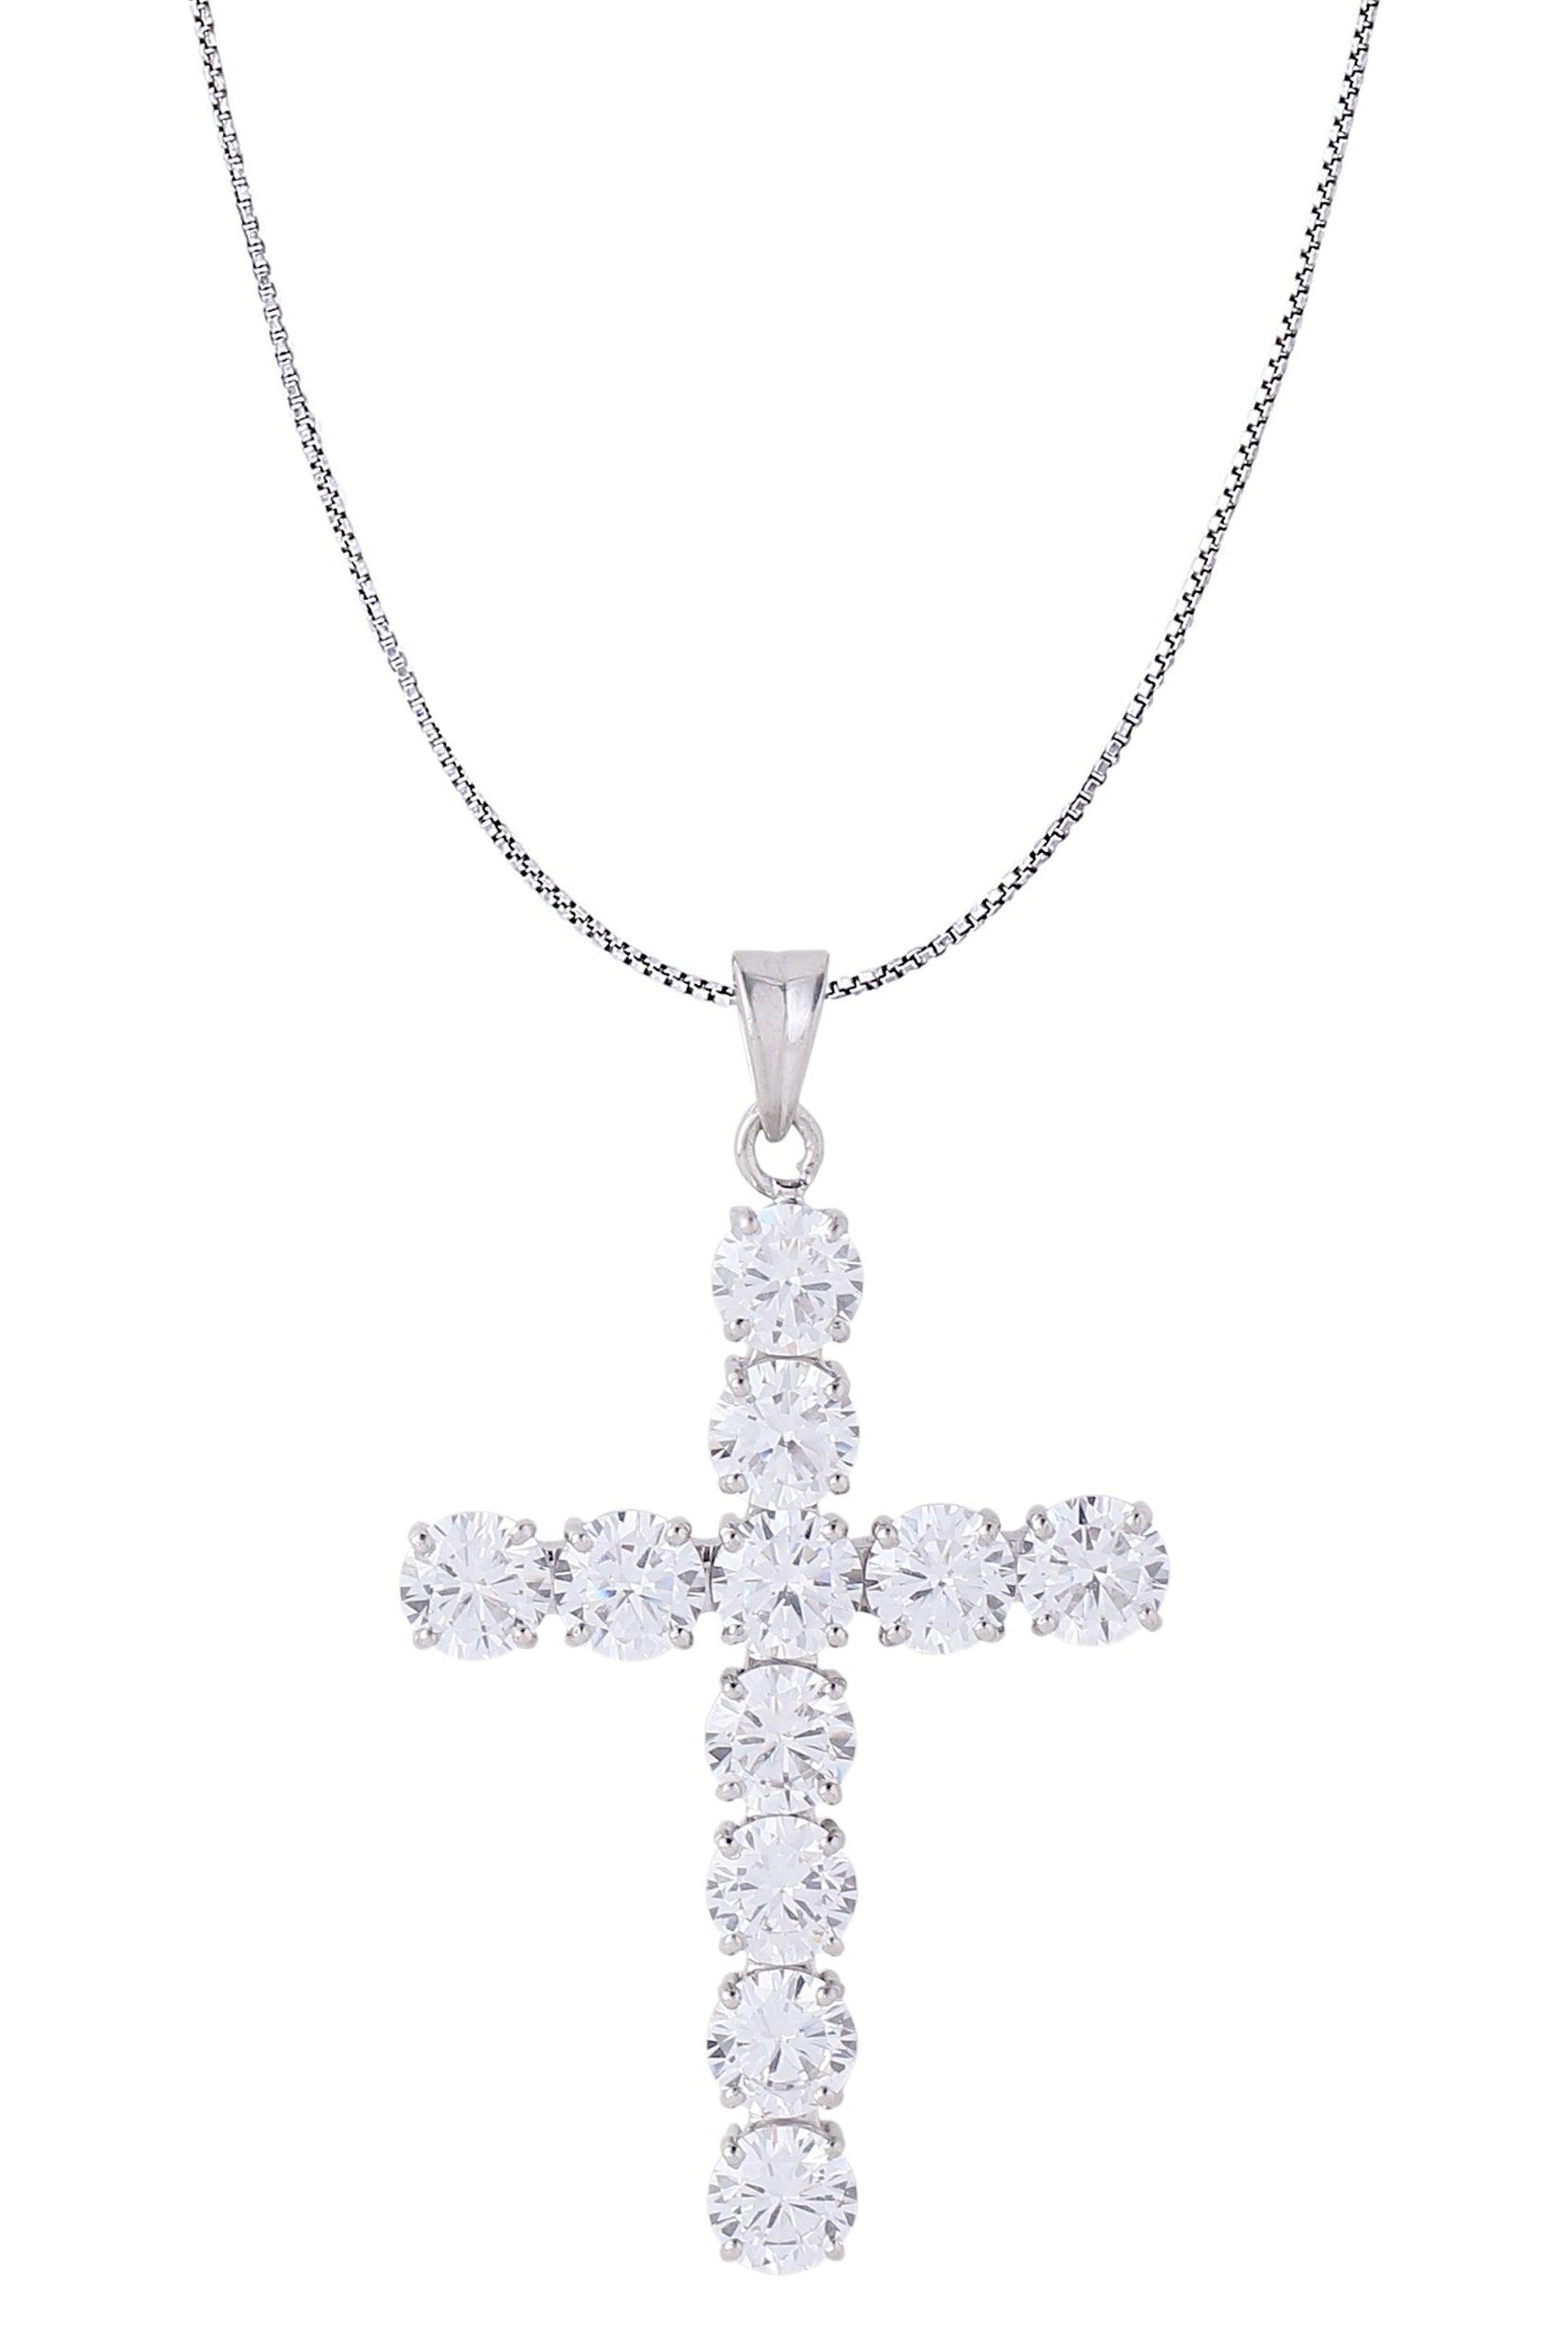 White Gold Color Classic Cross Pendant Made of 925 Sterling Silver Material with 20 Inch Long Silver Chain